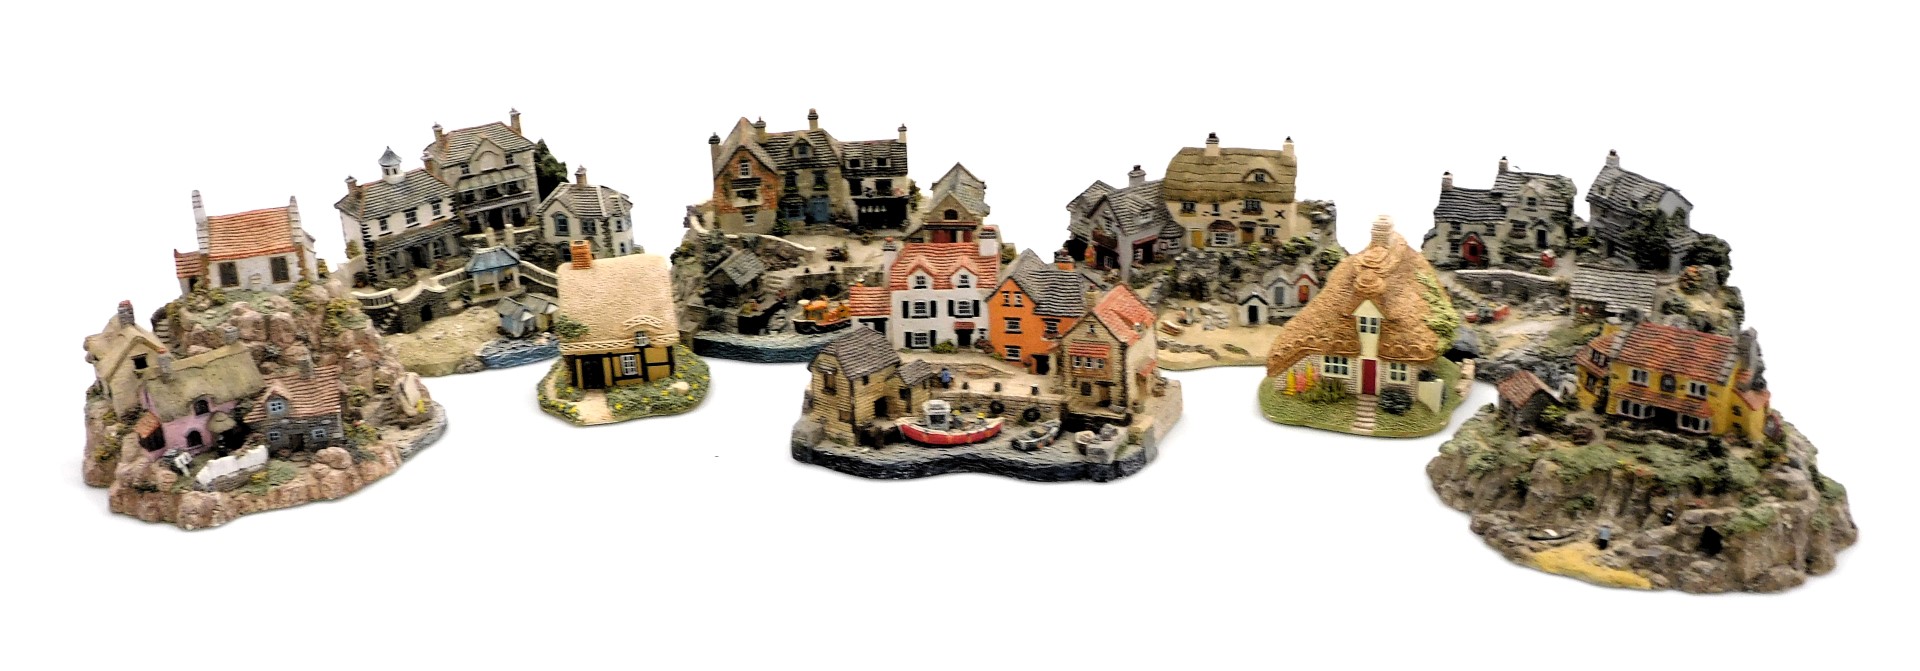 A group of Lilliput Lane and Danbury Mint sculptures, including Salters Quay, Fisherman's Cove, The